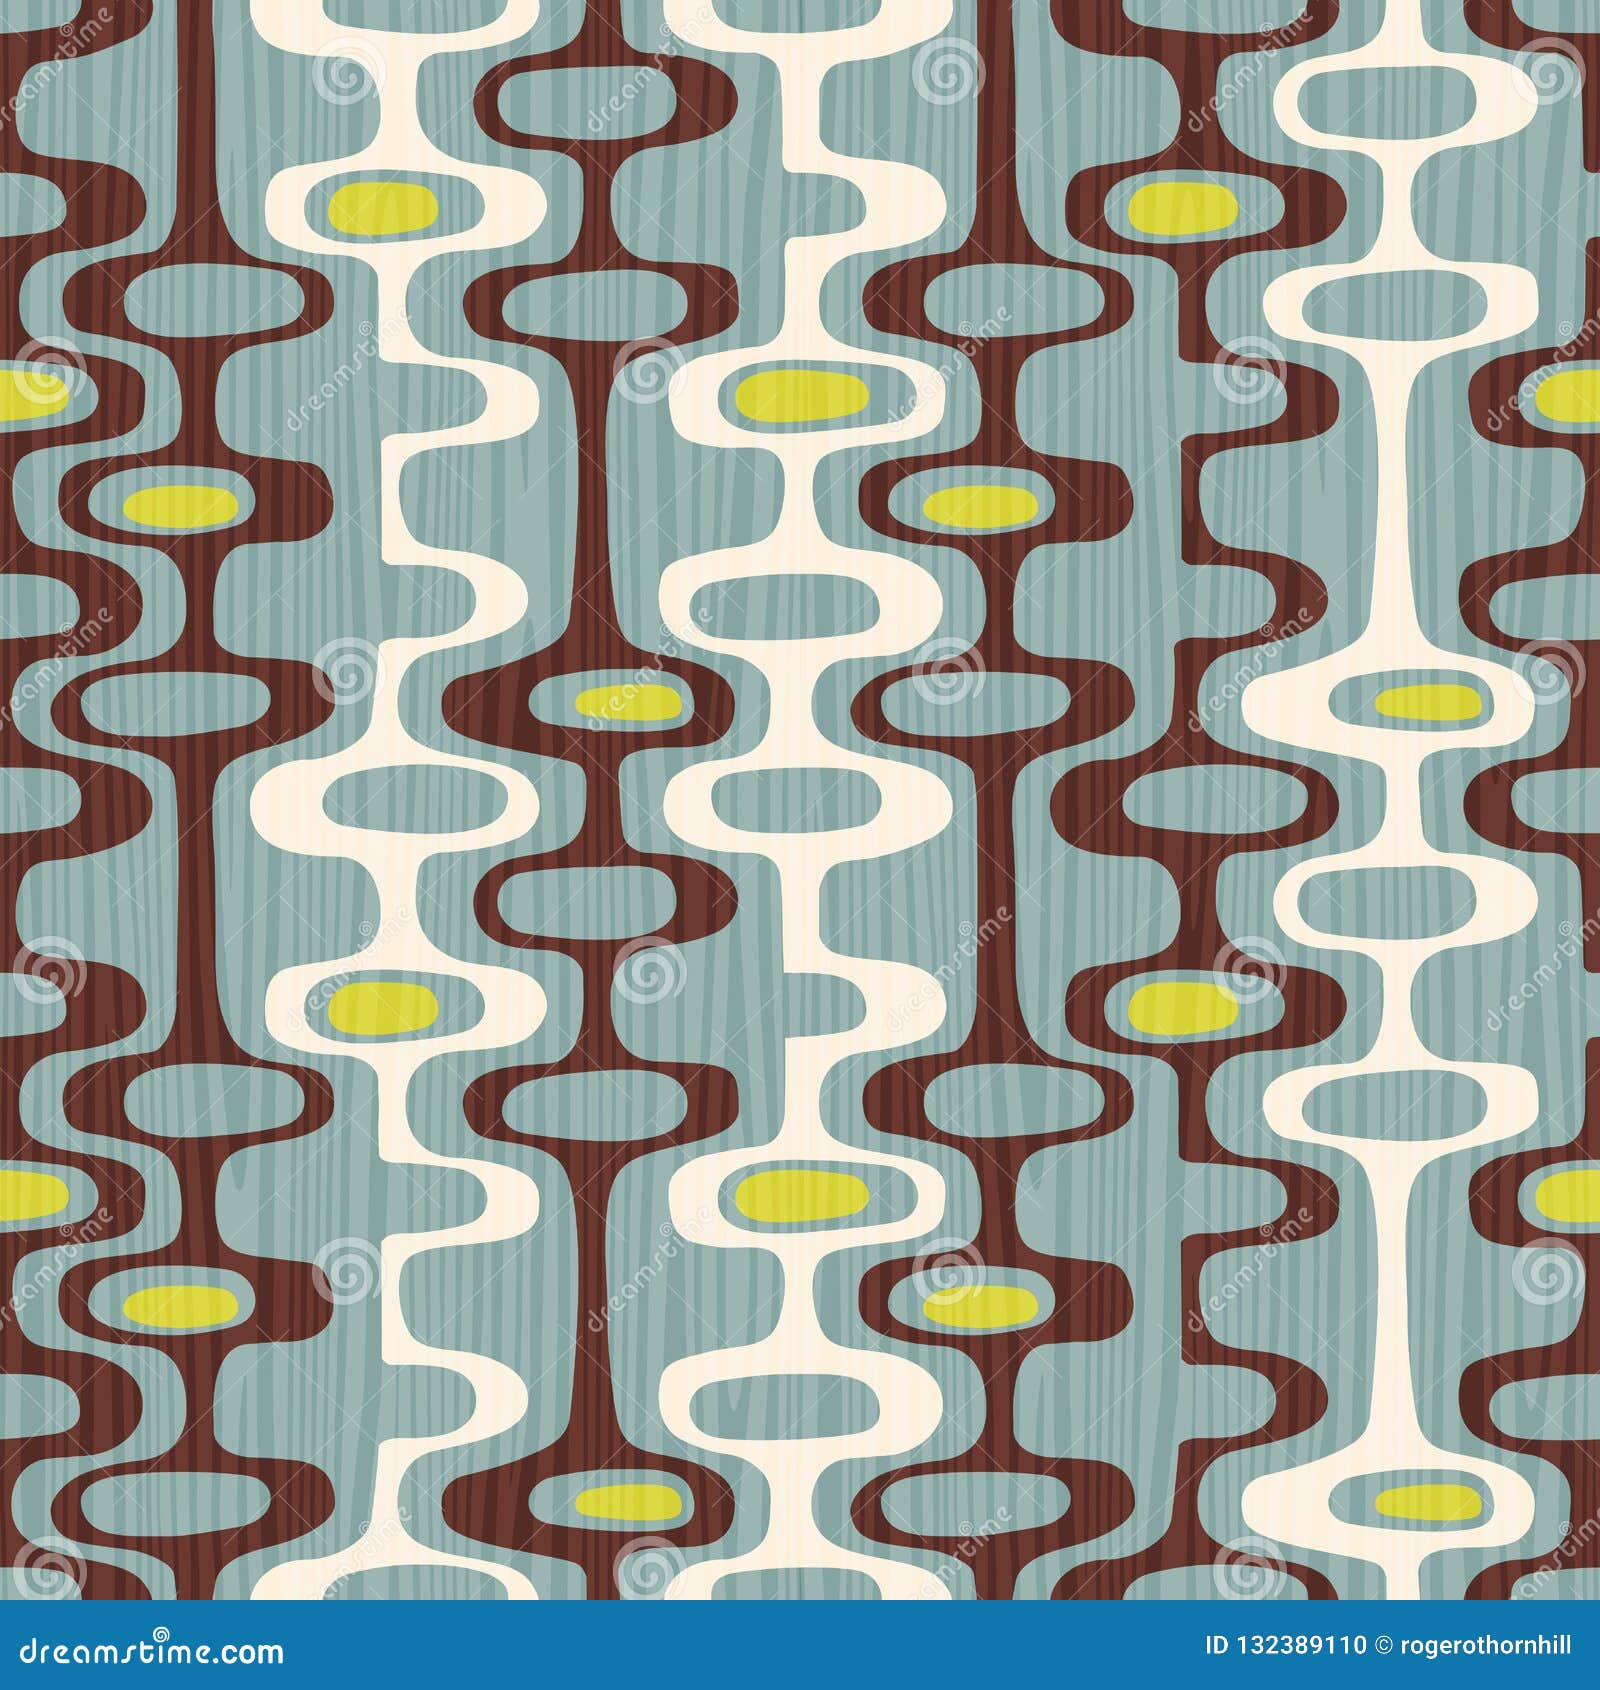 seamless abstract mid-century modern pattern of organic oval s and stripes.